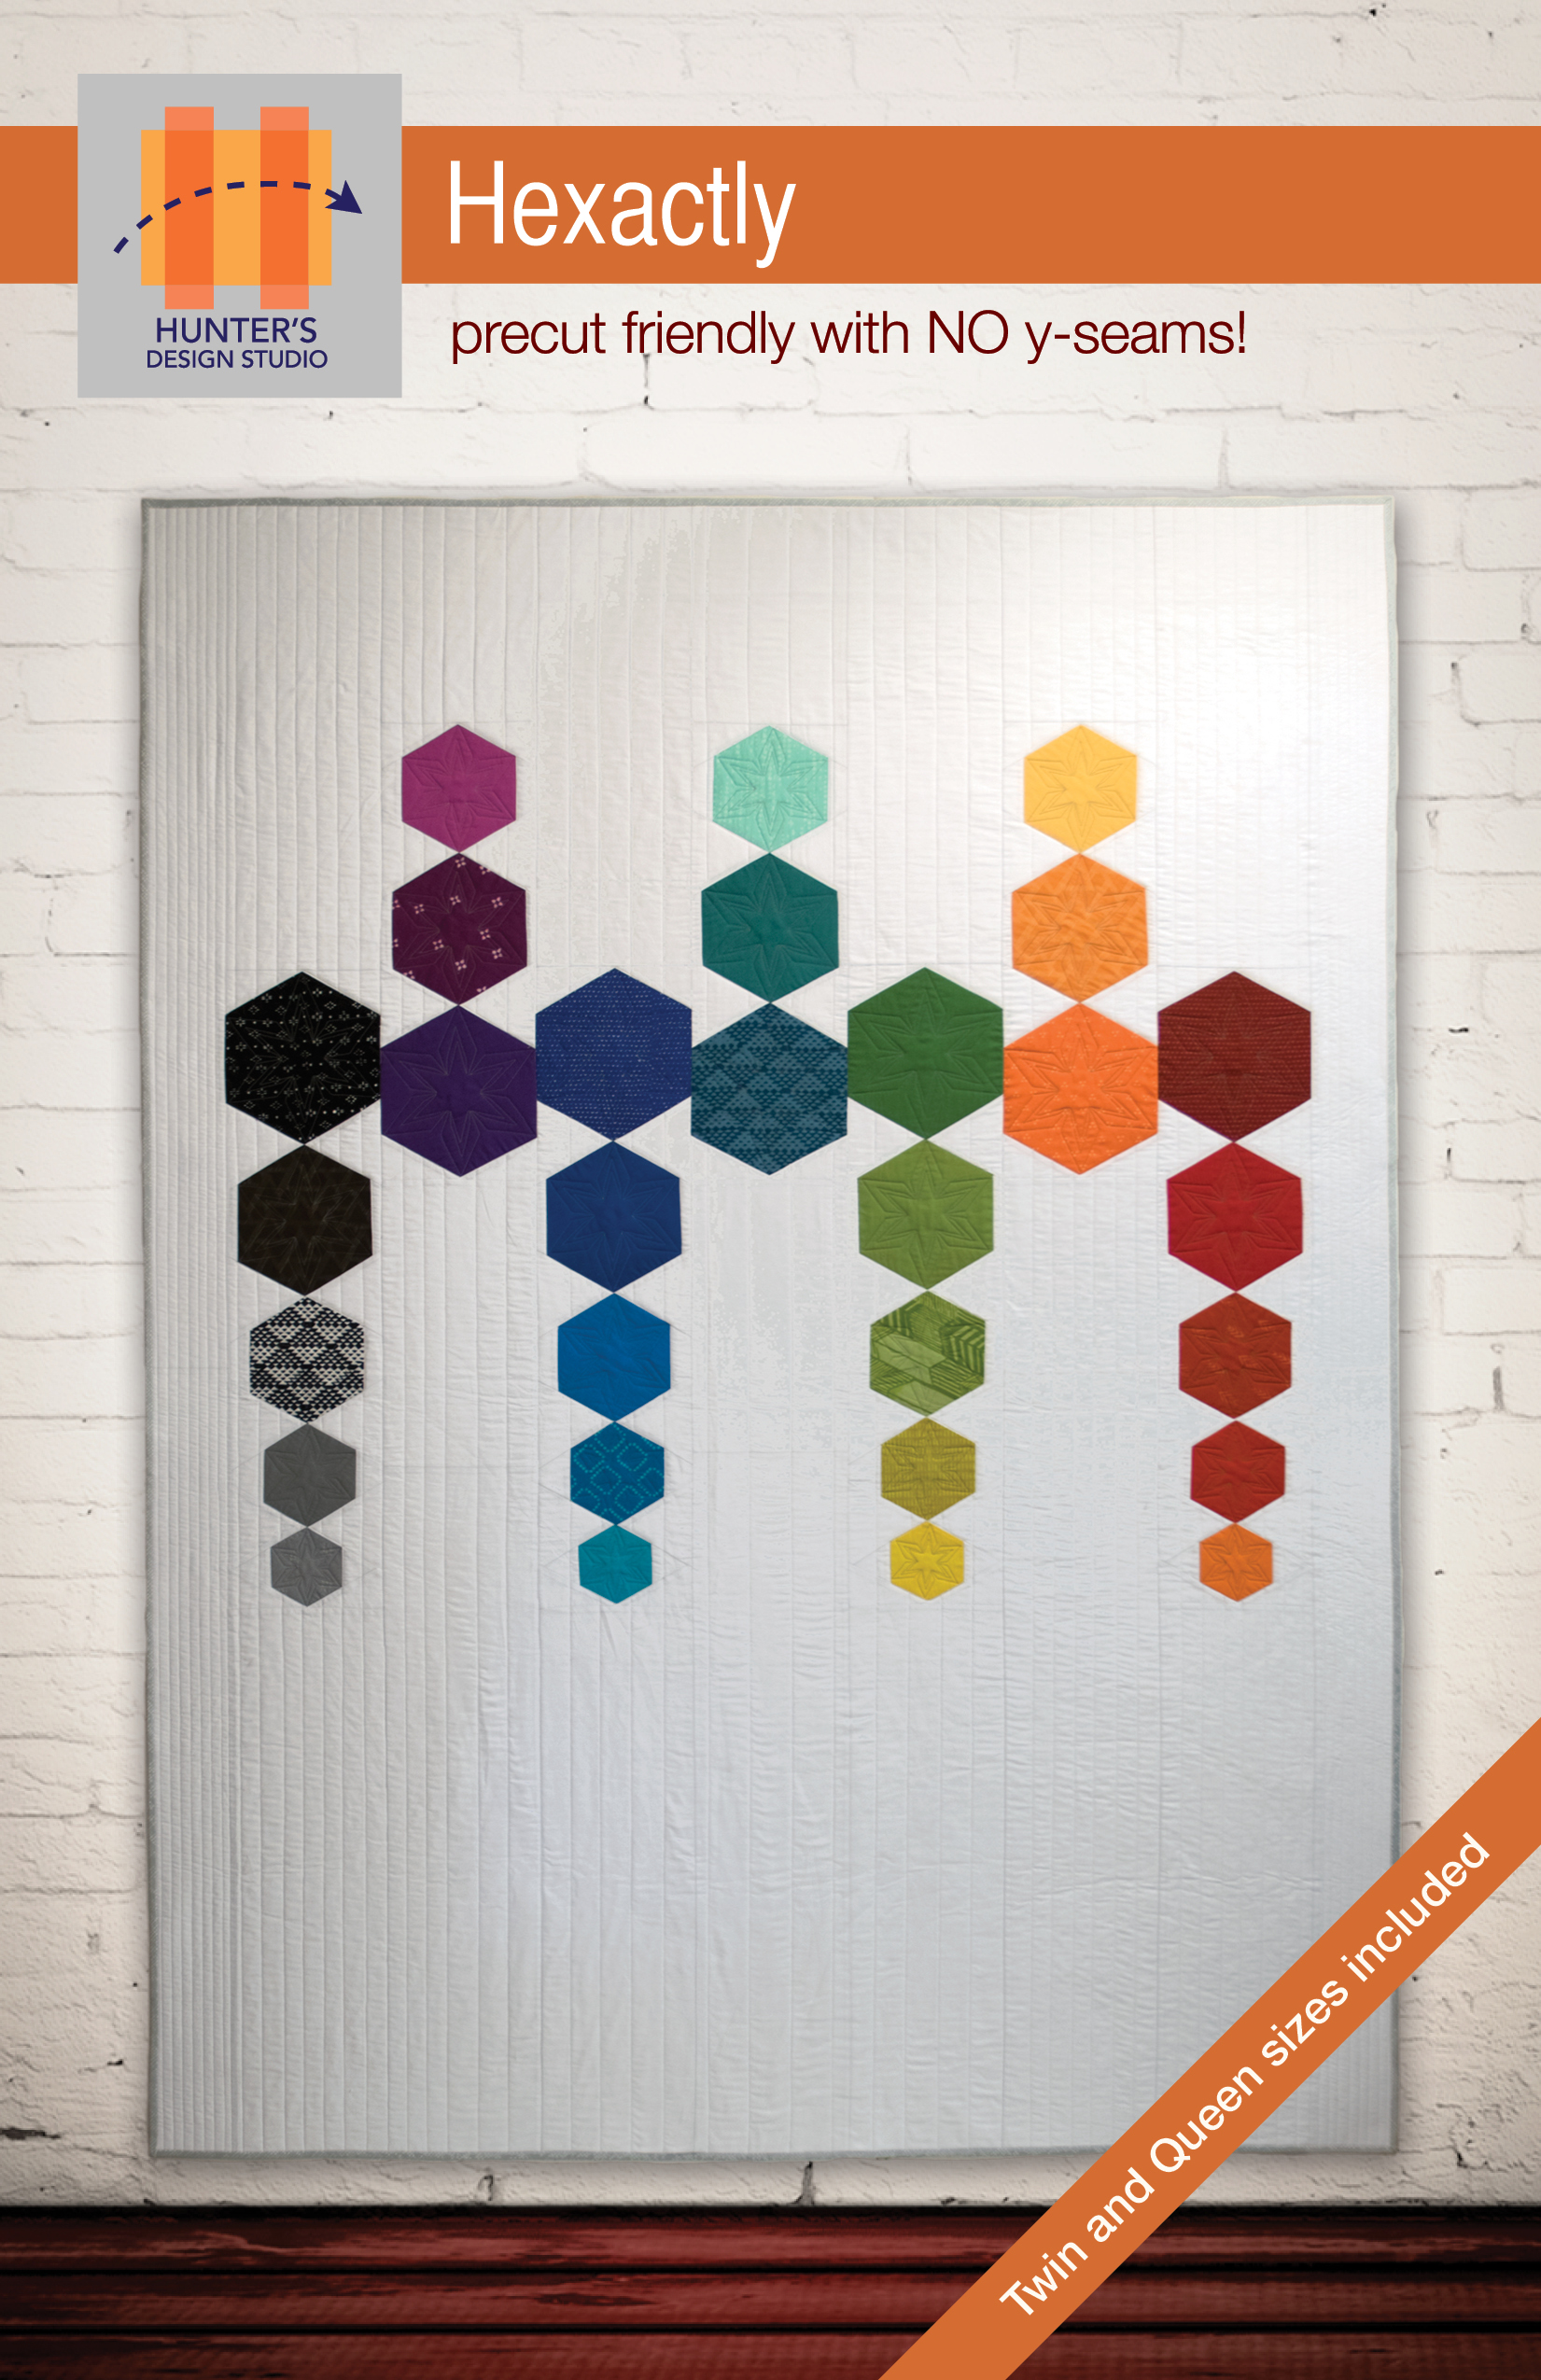 Hexactly is a modern quilt featuring multisized hexagons in five sizes. These hexagons are arrange in lines.